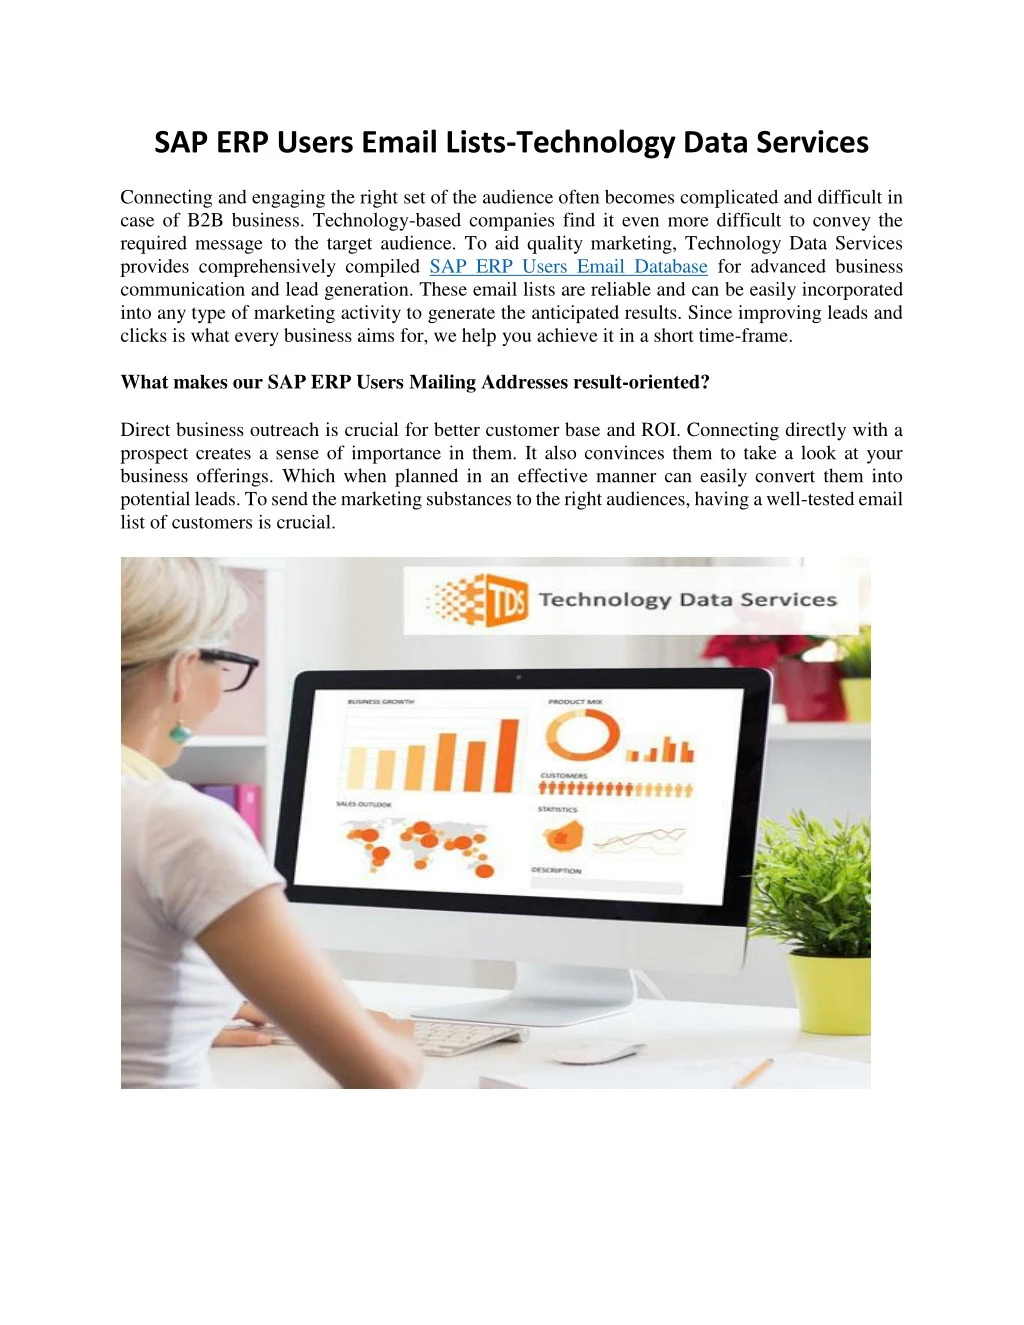 sap erp users email lists technology data services